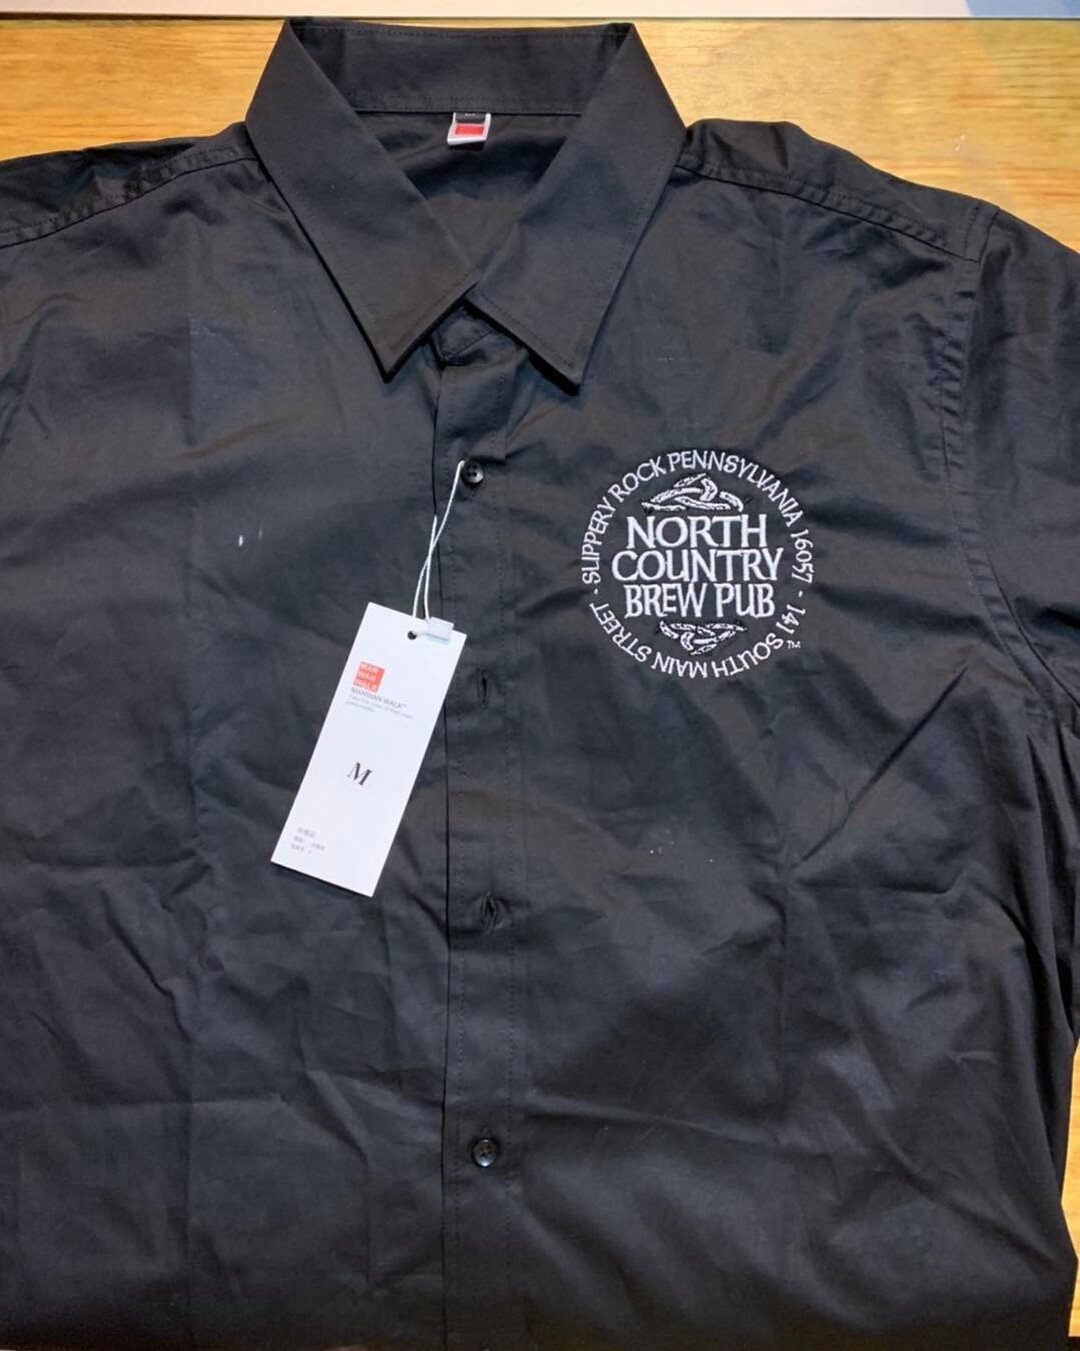 Don&rsquo;t forget we can also embroider dress shirts, aprons, or anything you may need for you pub or restaurant! And if you haven&rsquo;t already be sure to head out to slippery rock and try out the food at the Slippery rock brewery great food and 